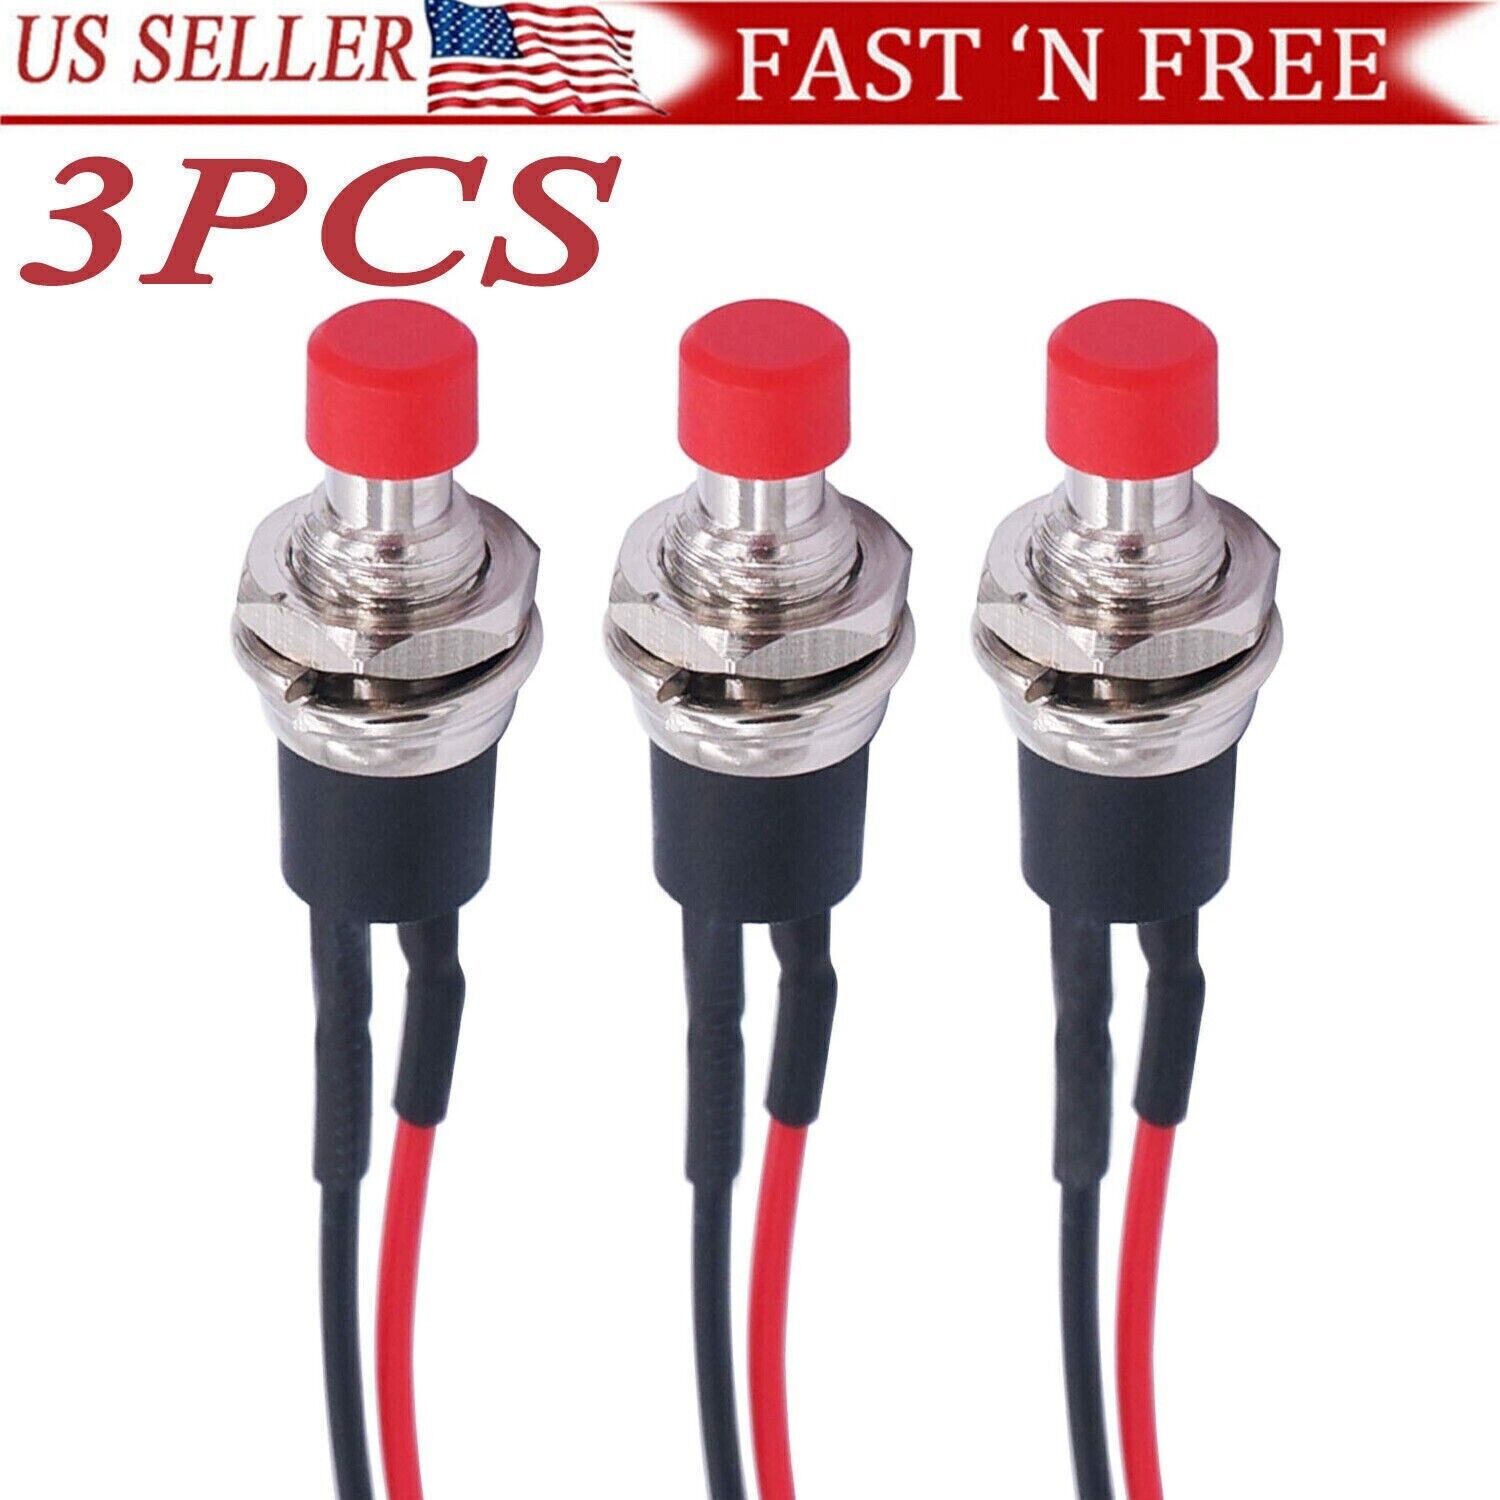 3 Pack Mini Push Button Pre-Wired Momentary N/O OFF-ON Switch Plug 12V 5AMP SPST